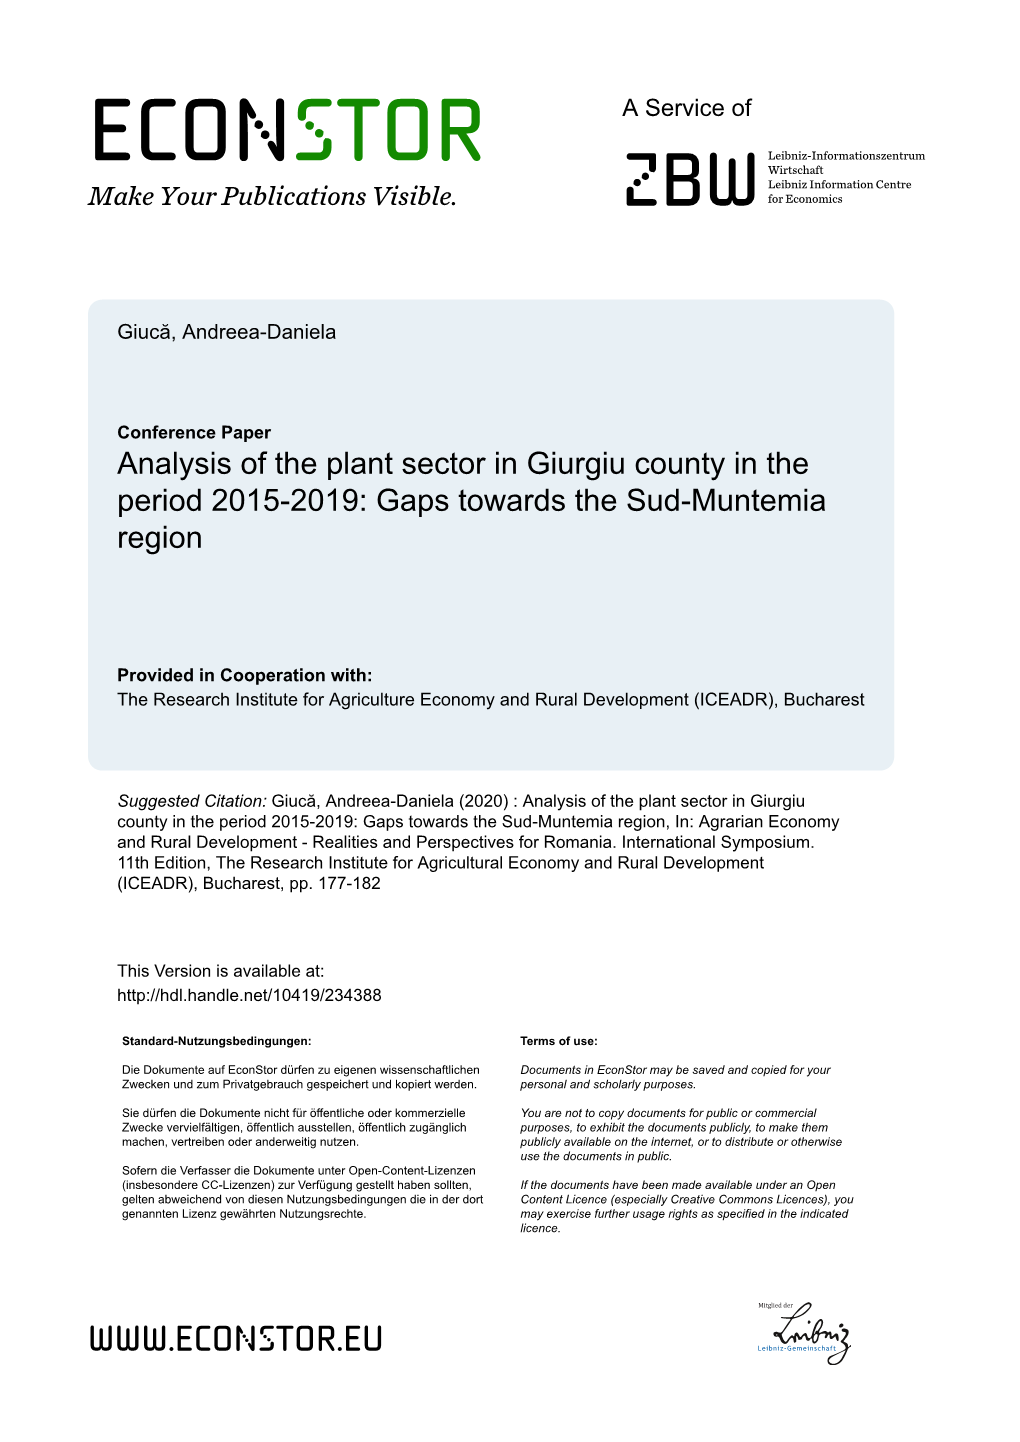 Analysis of the Plant Sector in Giurgiu County in the Period 2015-2019: Gaps Towards the Sud-Muntemia Region